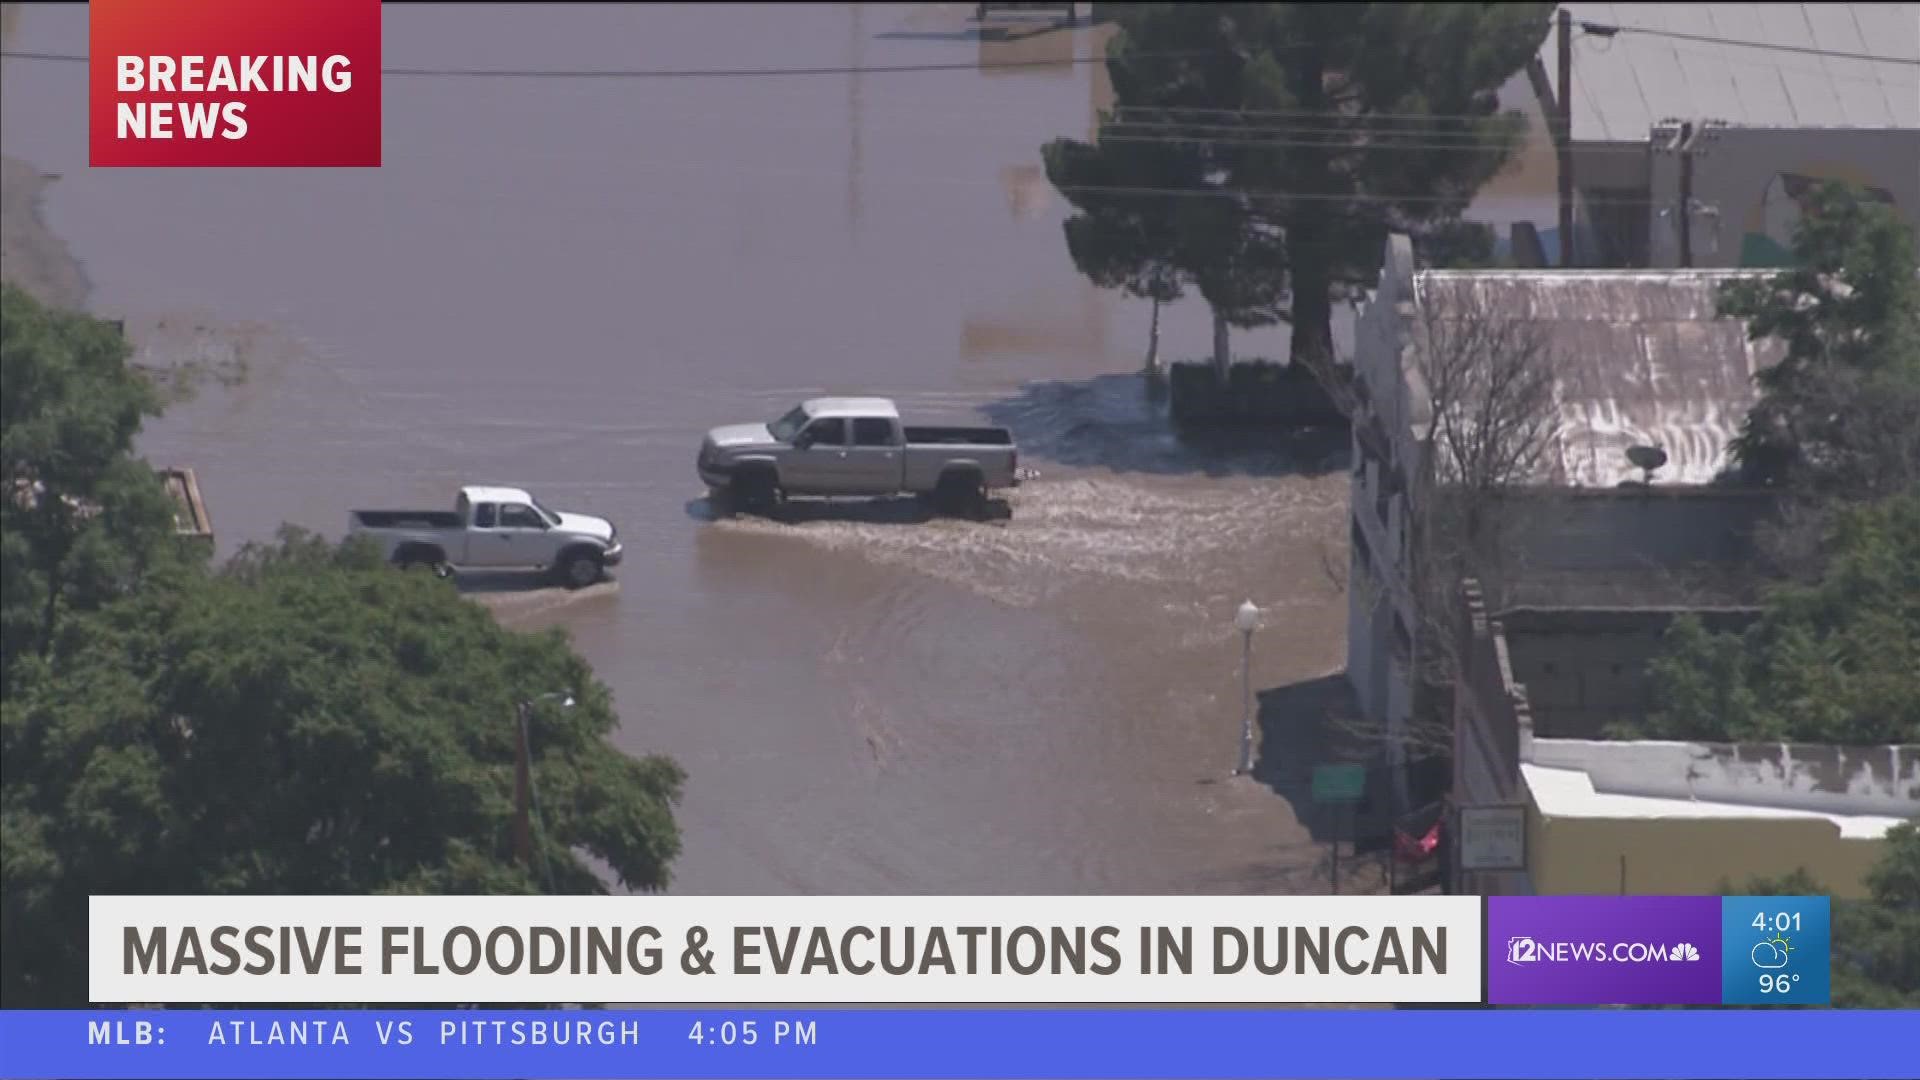 The Duncan Valley Rural Fire District has started mass evacuations of flood-prone areas after the Gila River overflowed its banks and began spilling into Duncan.